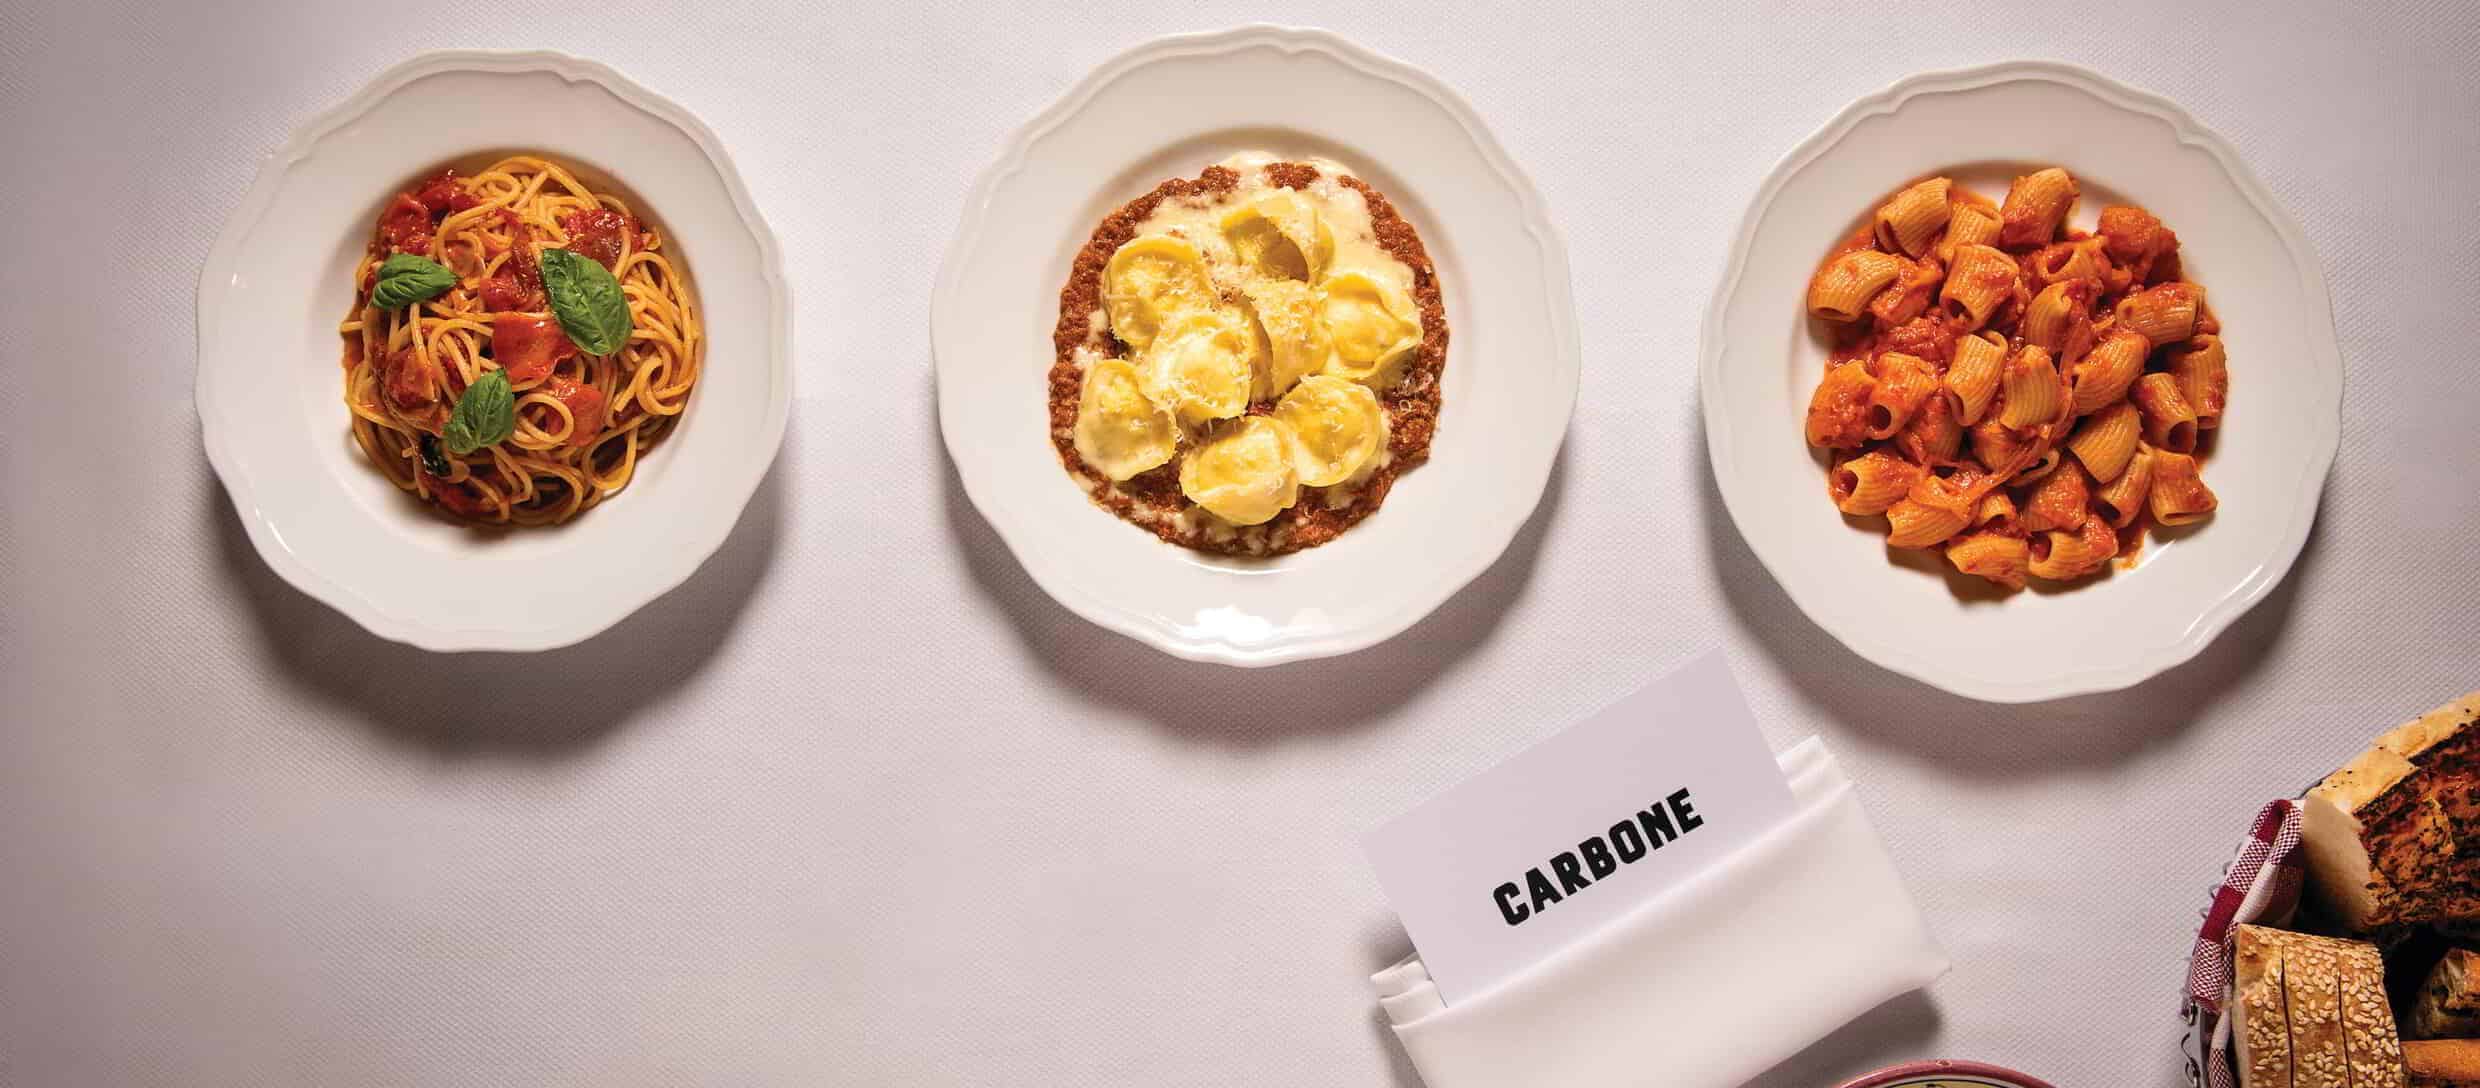 Featured Carbone LV italian dishes